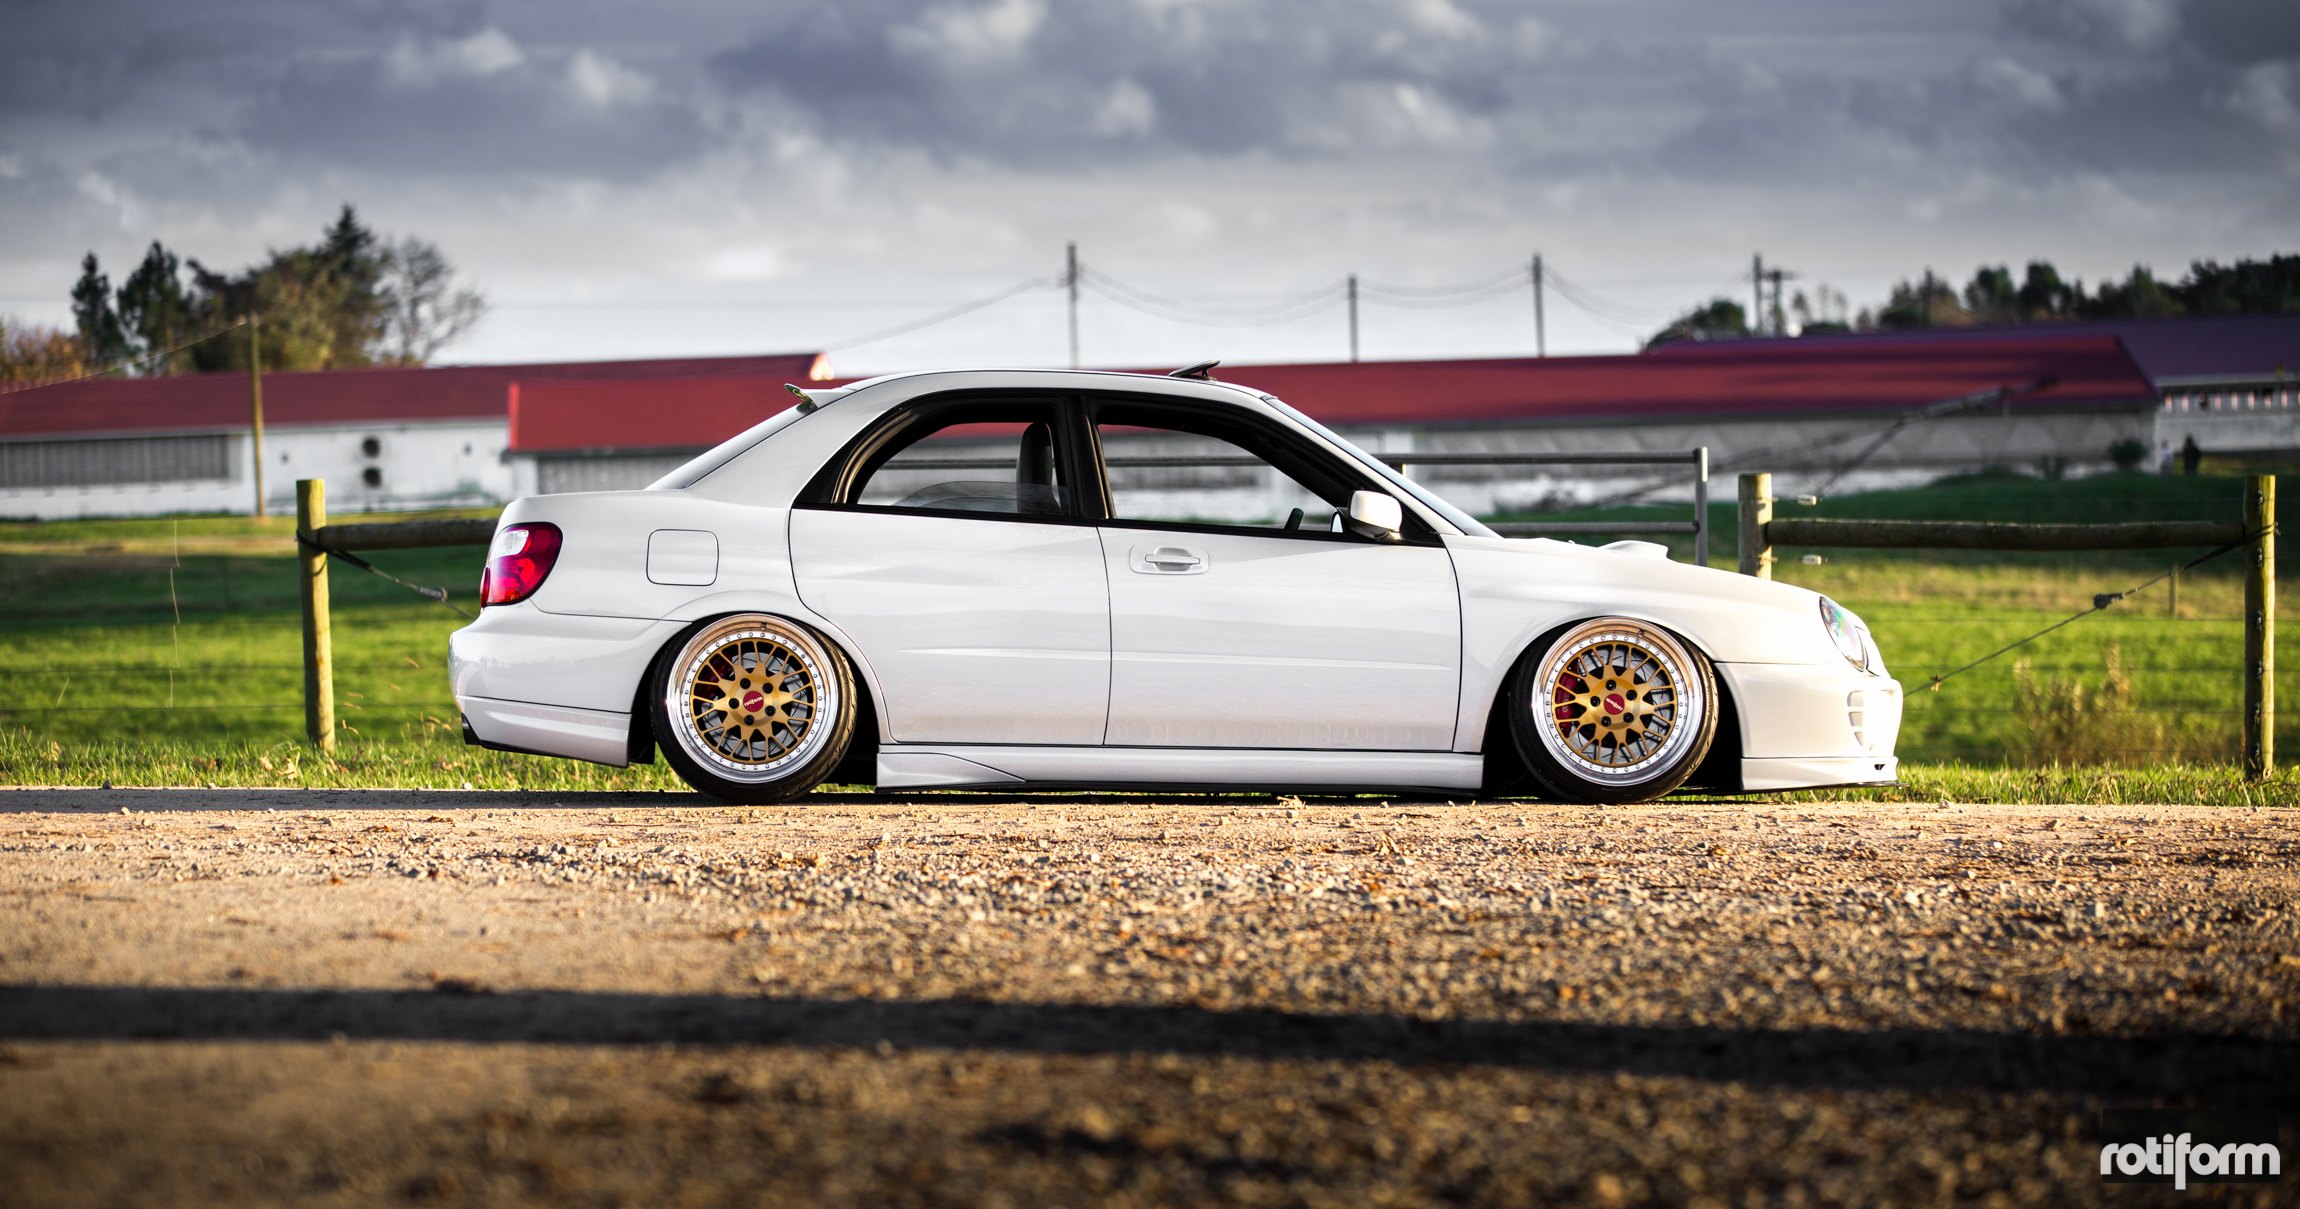 White Subaru WRX with Aftermarket Side Skirts - Photo by Rotiform